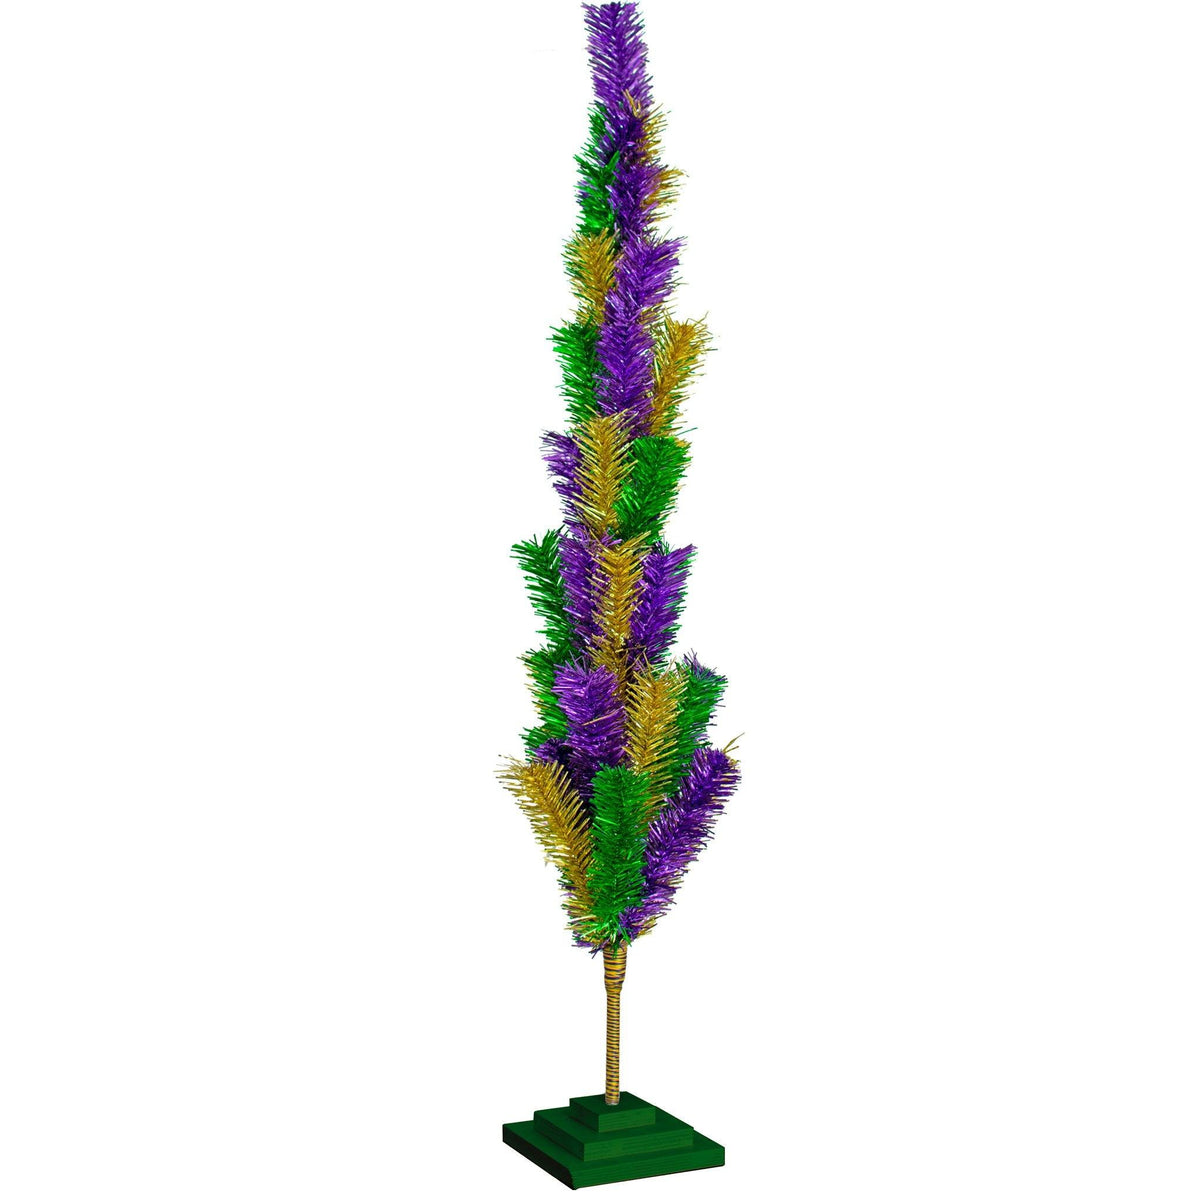 Introducing Lee Display's brand new Purple, Green, & Gold Christmas Trees made by hand in the USA! Decorate your holidays with a classic Mardi Gras-themed Tinsel Christmas Tree on sale at leedisplay.com